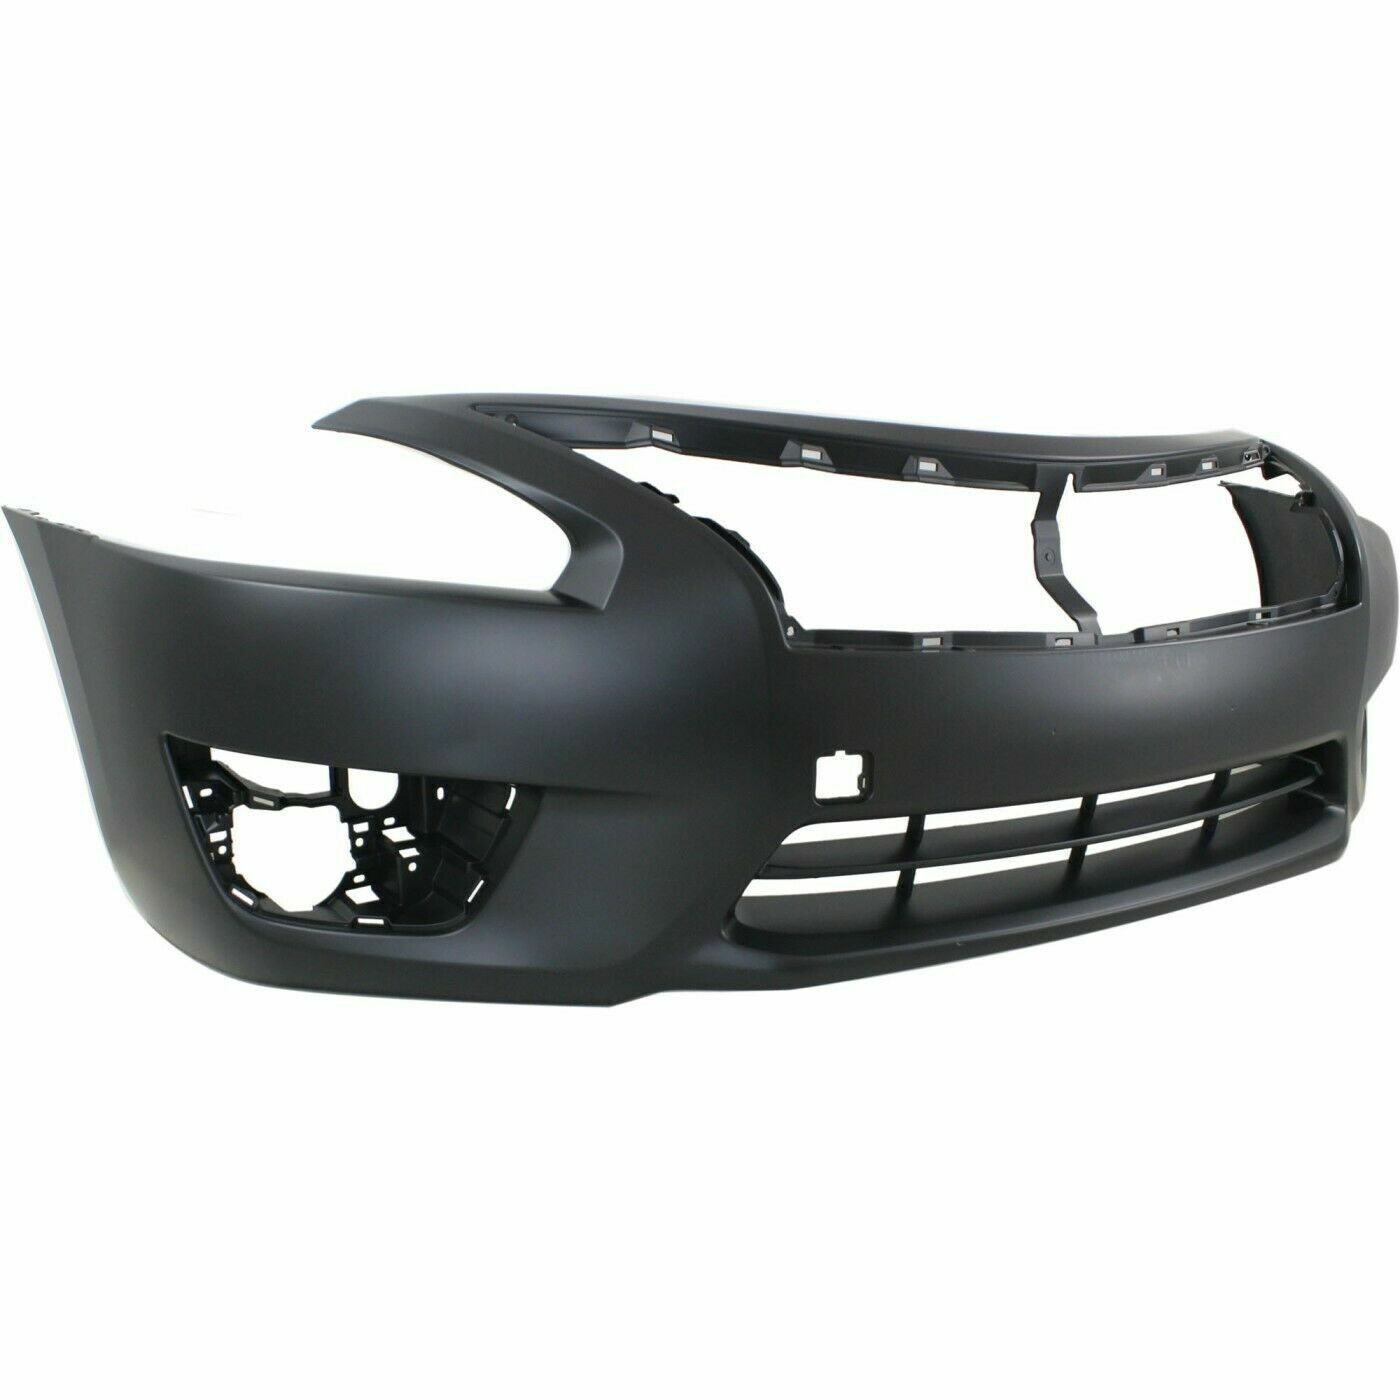 NEW PRIMED FRONT BUMPER COVER FOR 13-15 NISSAN ALTIMA SEDAN SHIPS TODAY